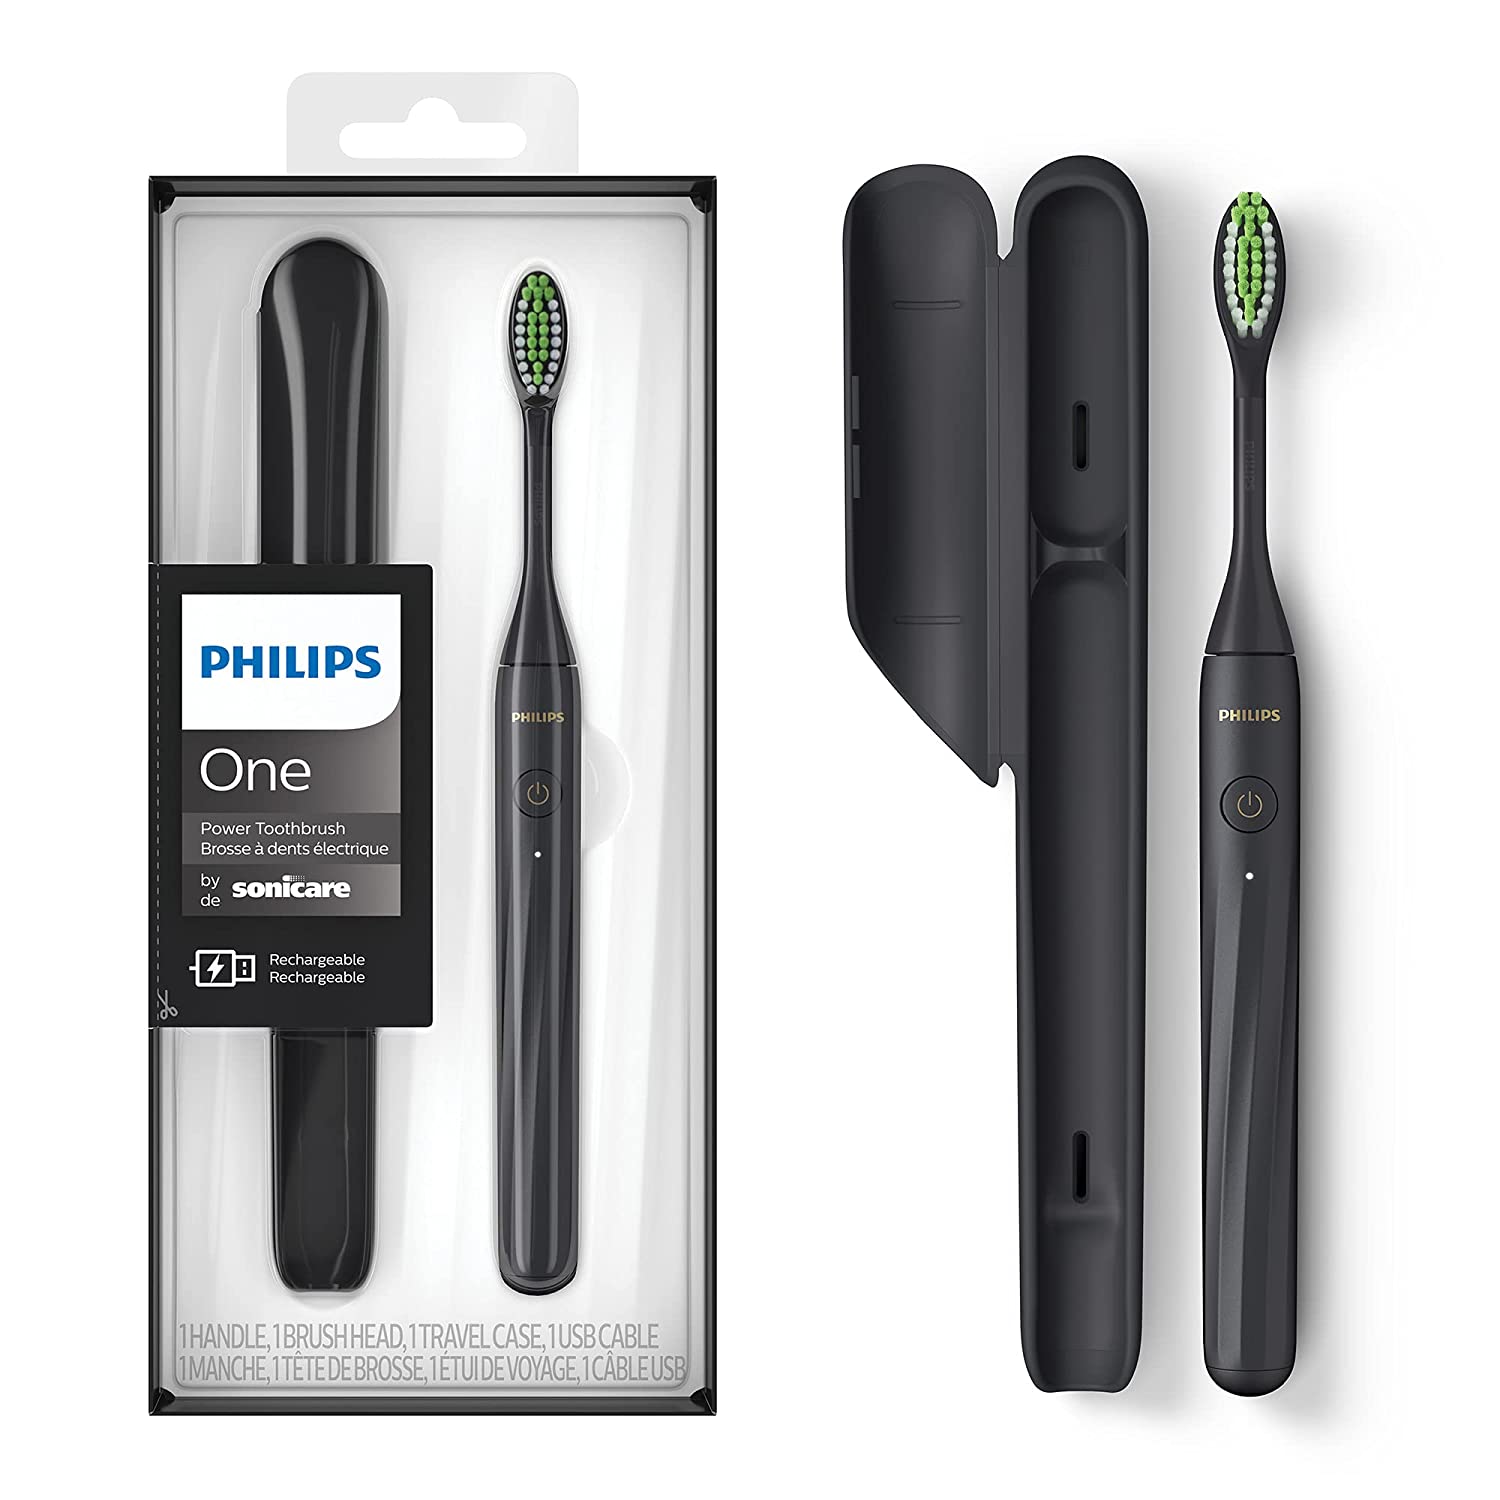 Philips One by Sonicare Rechargeable Toothbrush, Black, HY1200/06 - image 1 of 11